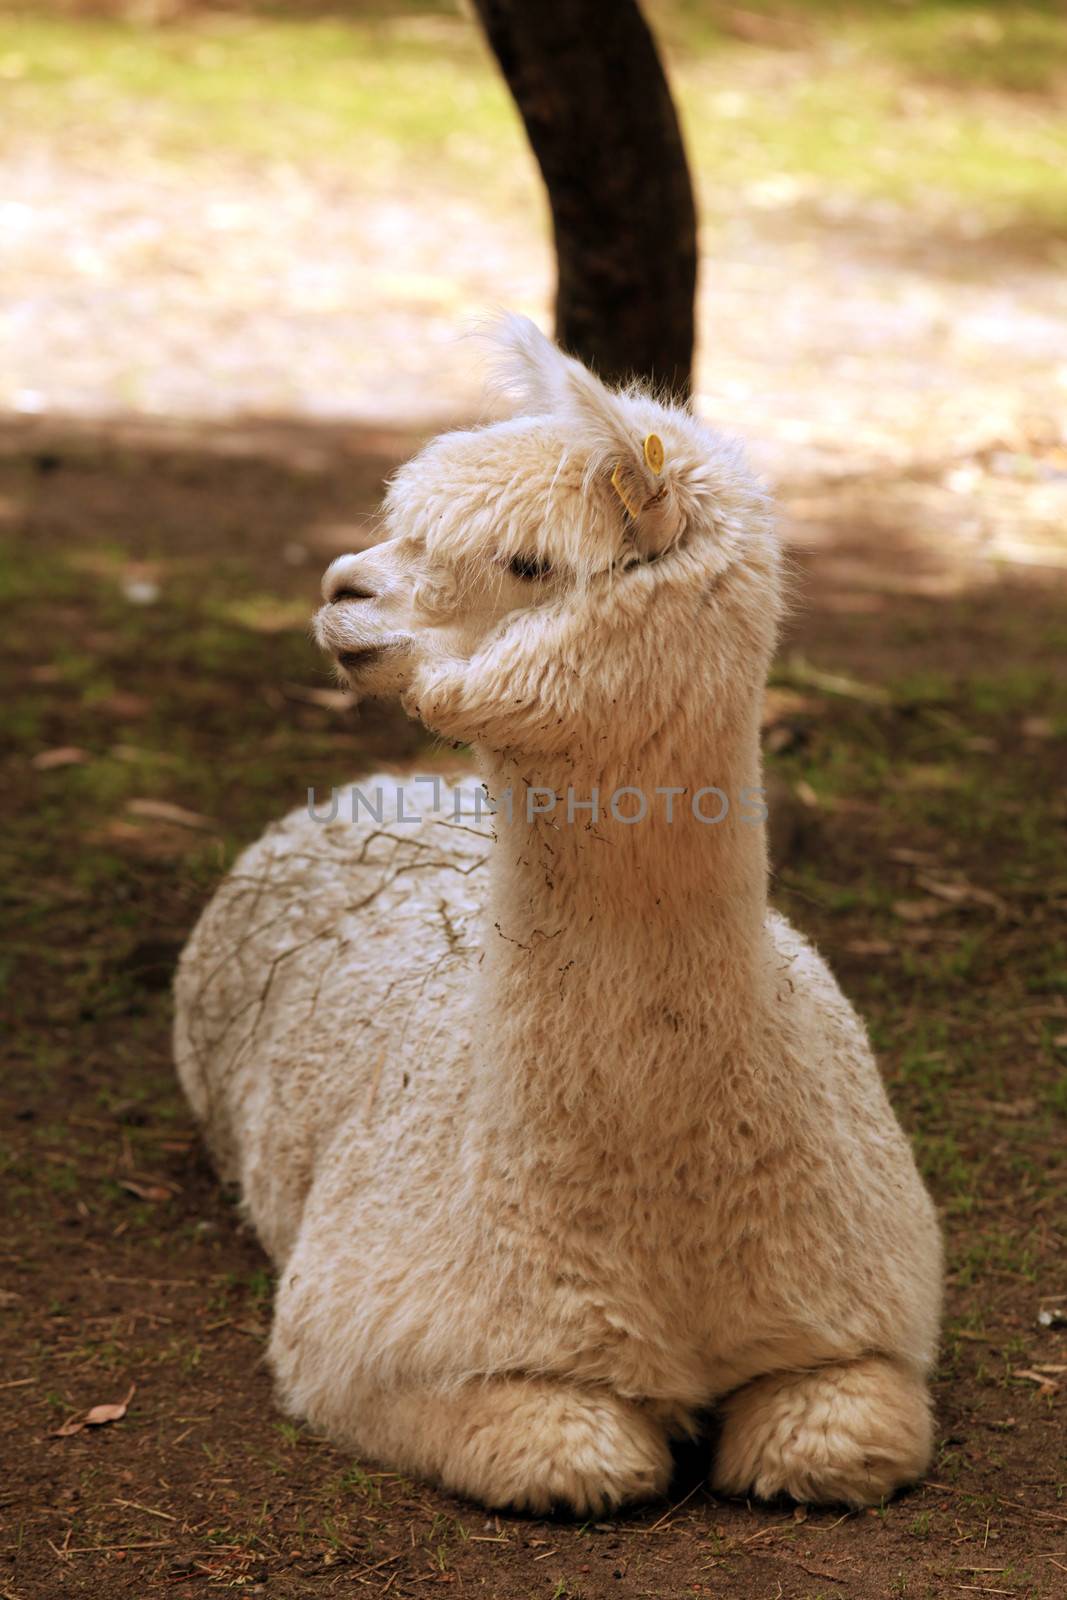 Alpaca Resting in a Petting Zoo Outdoors